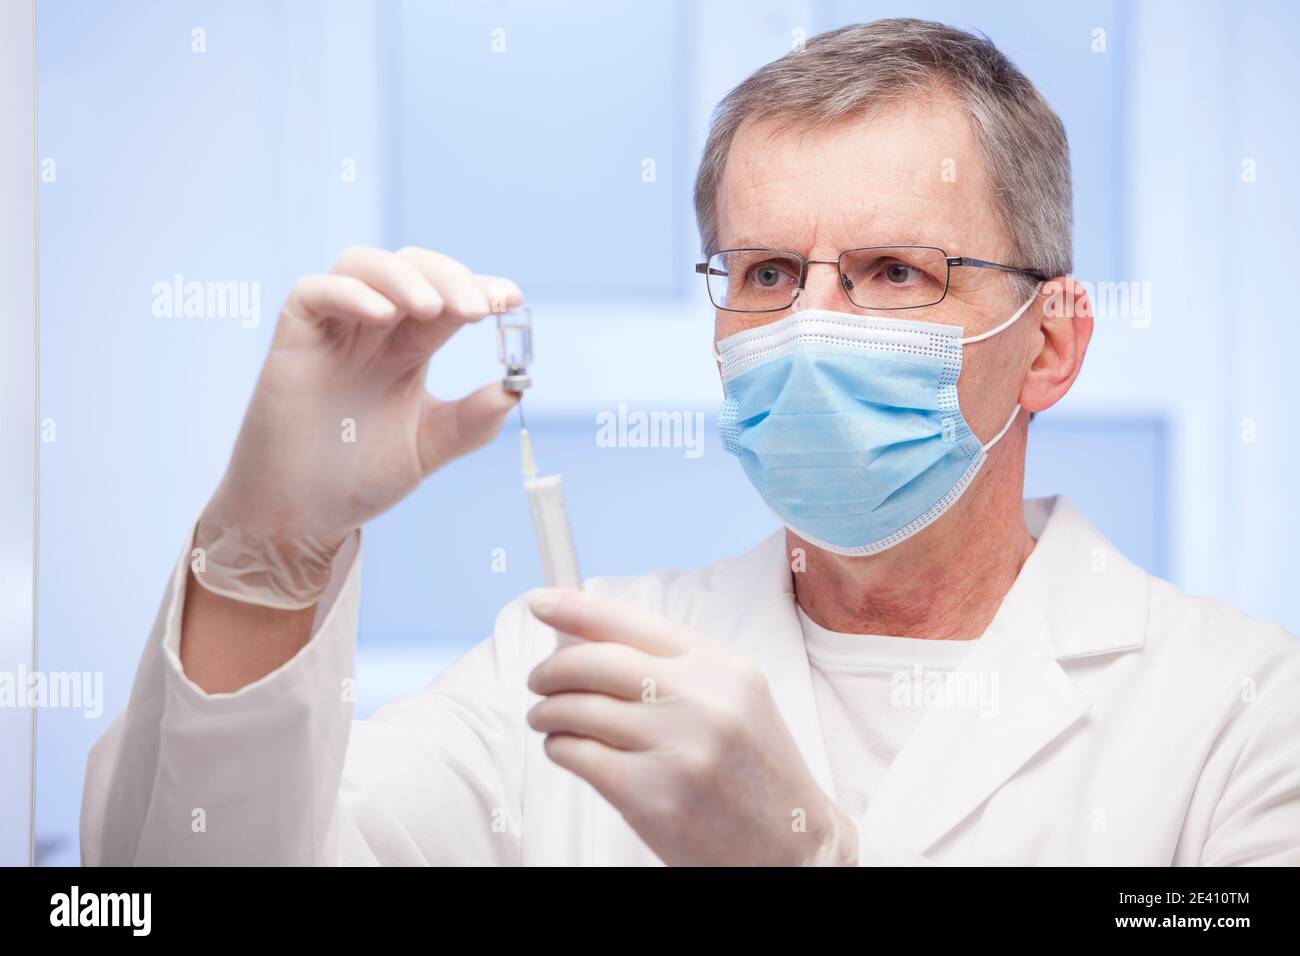 Doctor with medical mask preparing a syringe for vaccination against covid-19 - focus on the face Stock Photo